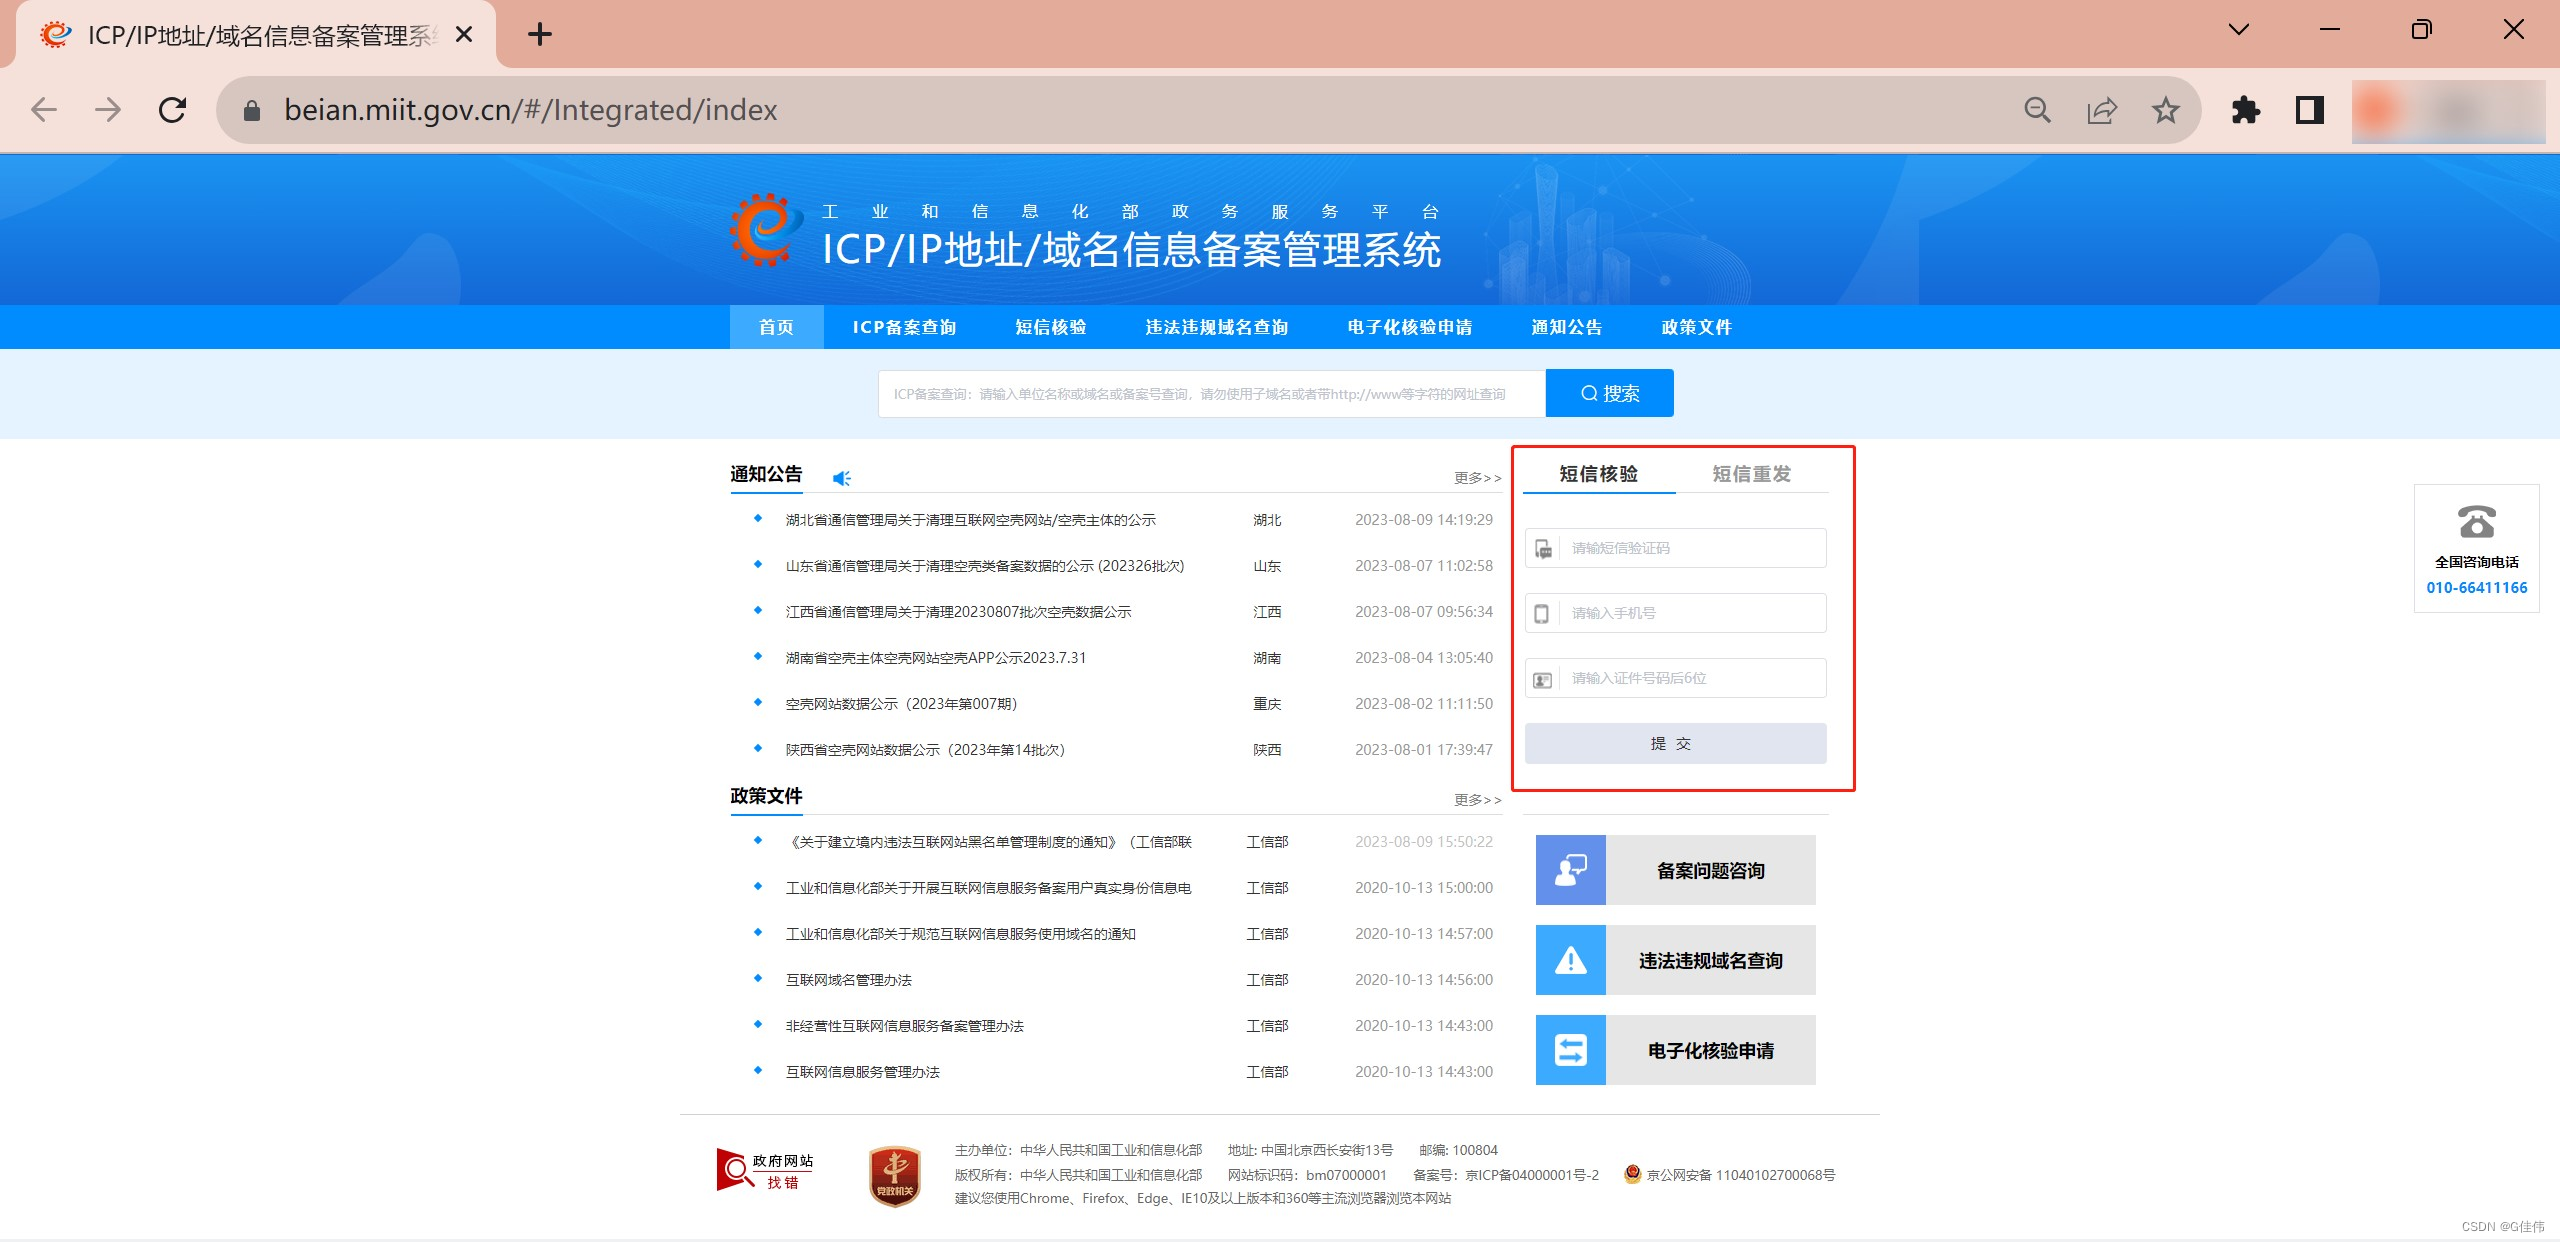 ICP/IP address/domain name information record management system